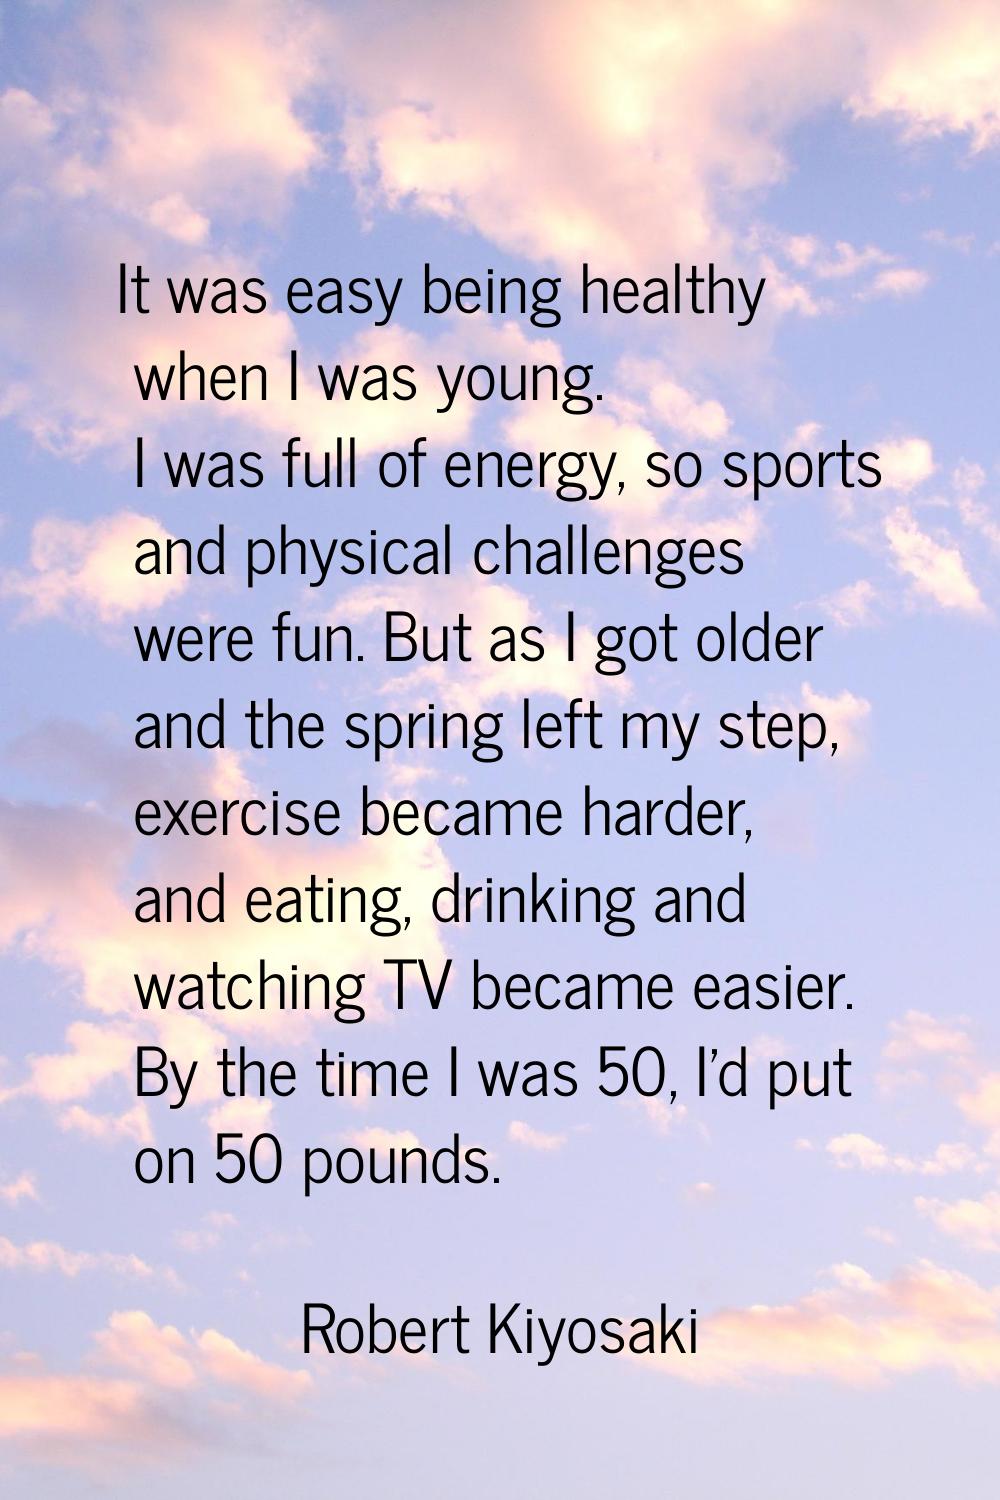 It was easy being healthy when I was young. I was full of energy, so sports and physical challenges